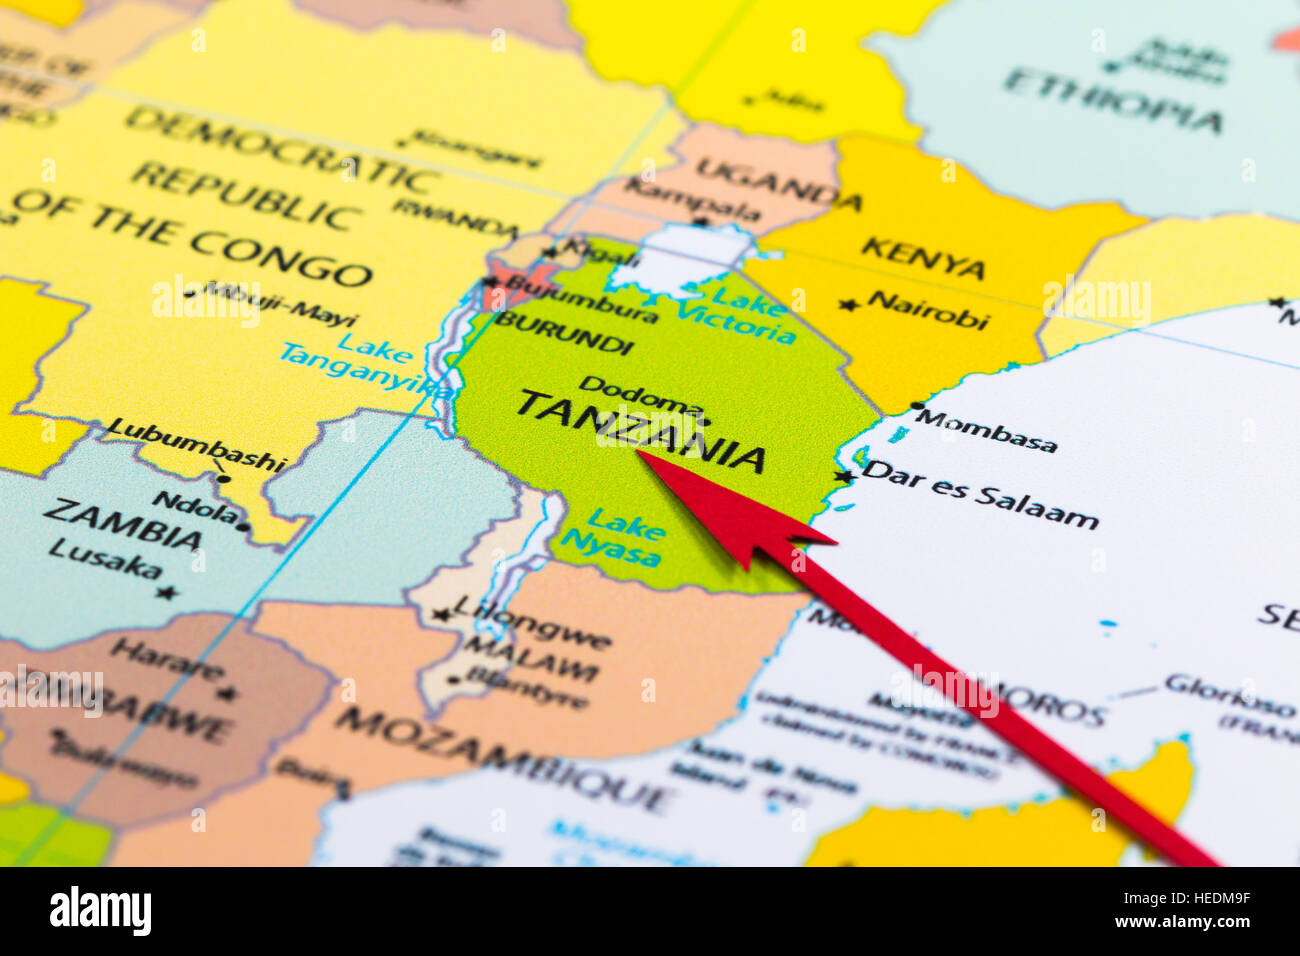 Red arrow pointing Tanzania on the map of Africa continent Stock Photo